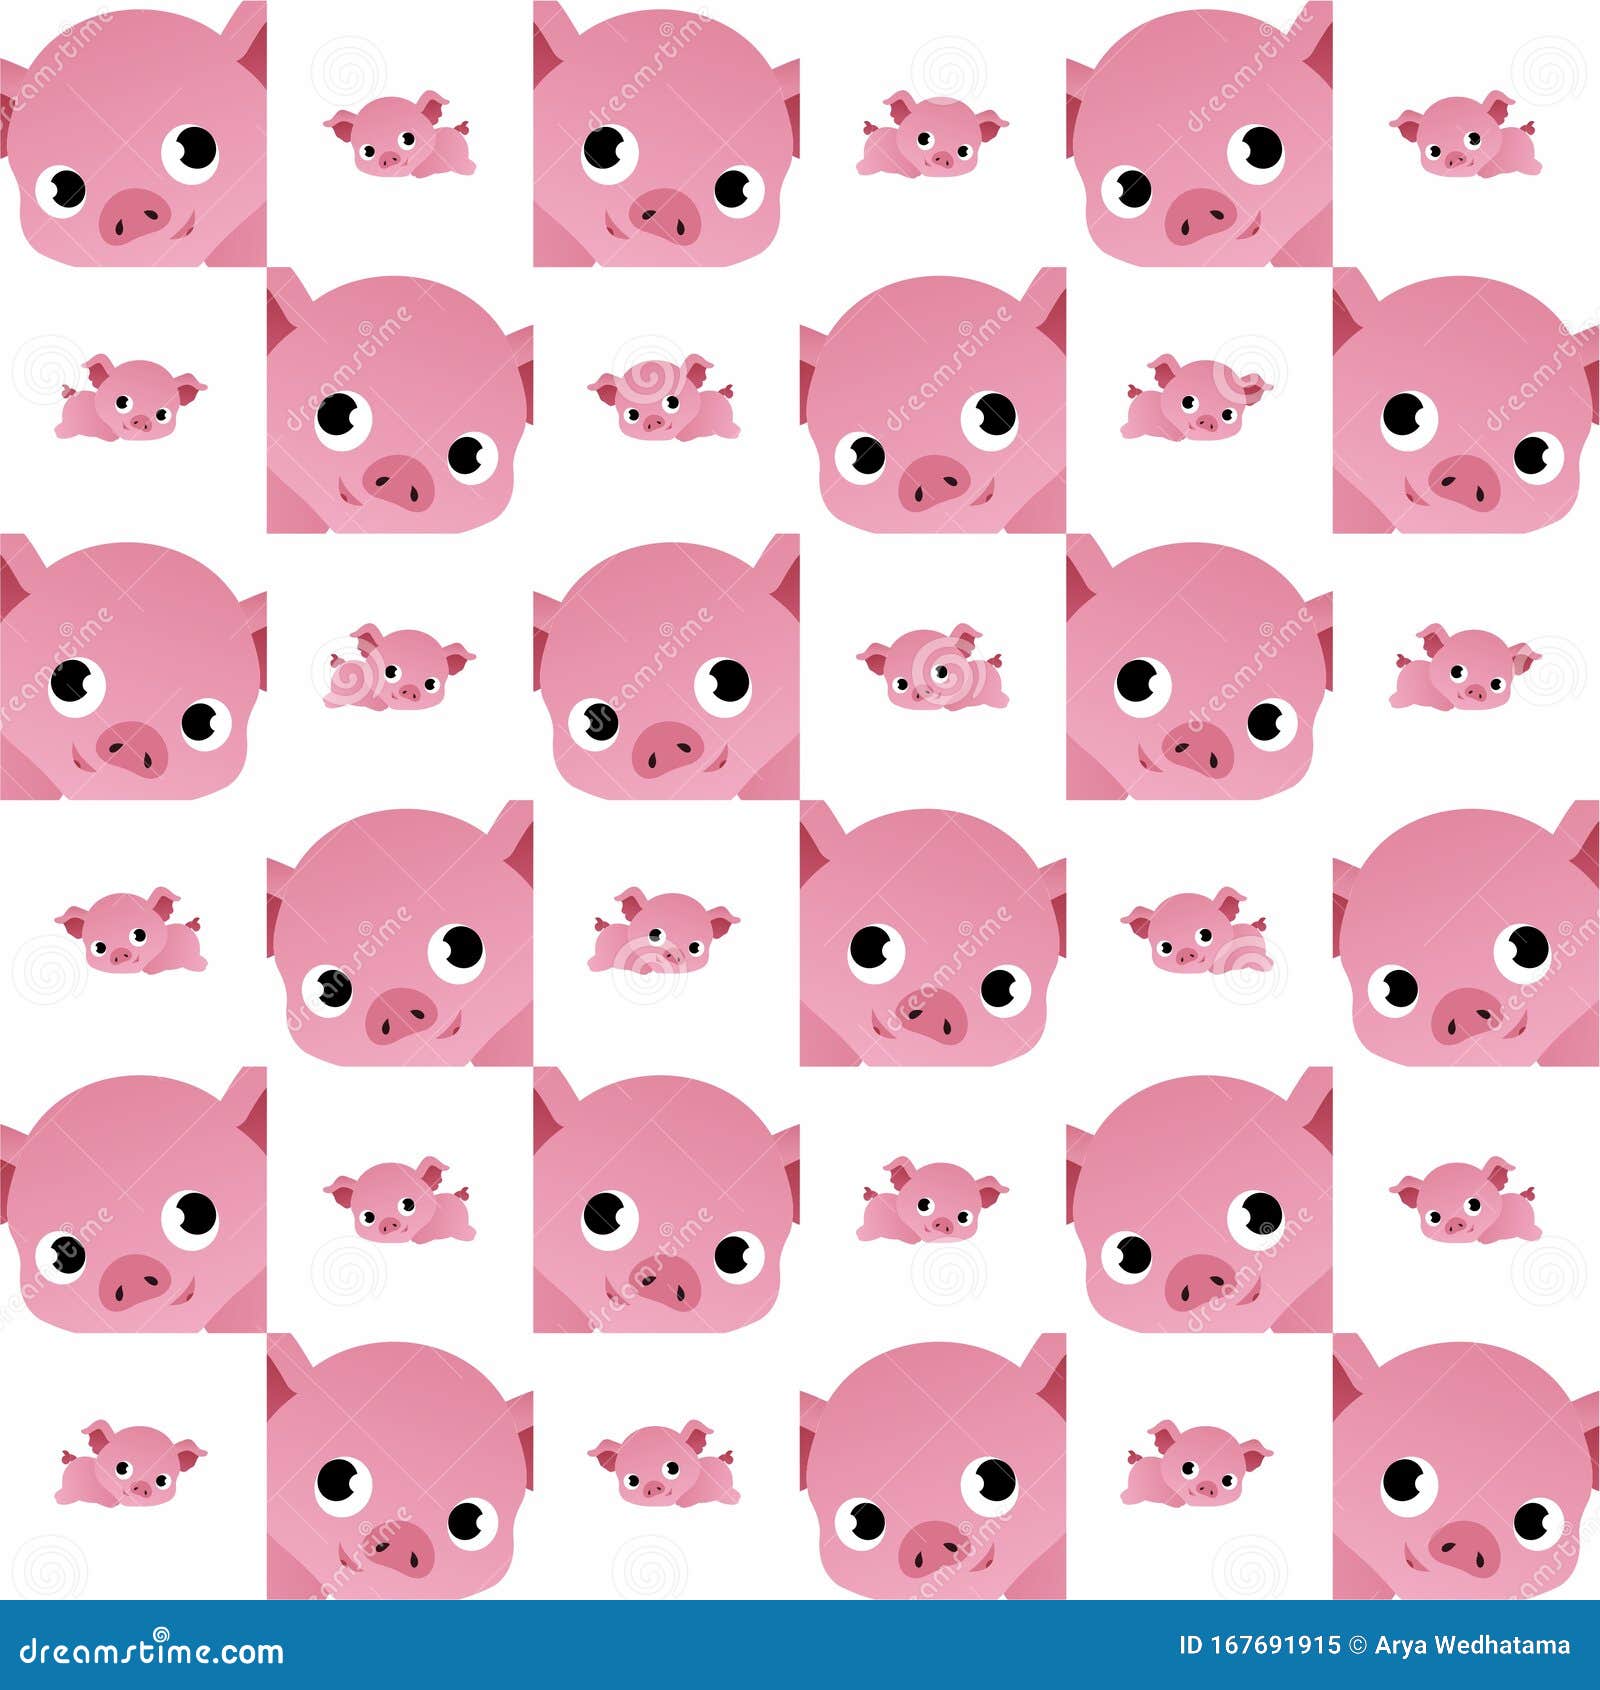 The Amazing of Cute Pig Illustration, Cartoon Funny Character, Pattern  Wallpaper Stock Illustration - Illustration of animal, cartoon: 167691915